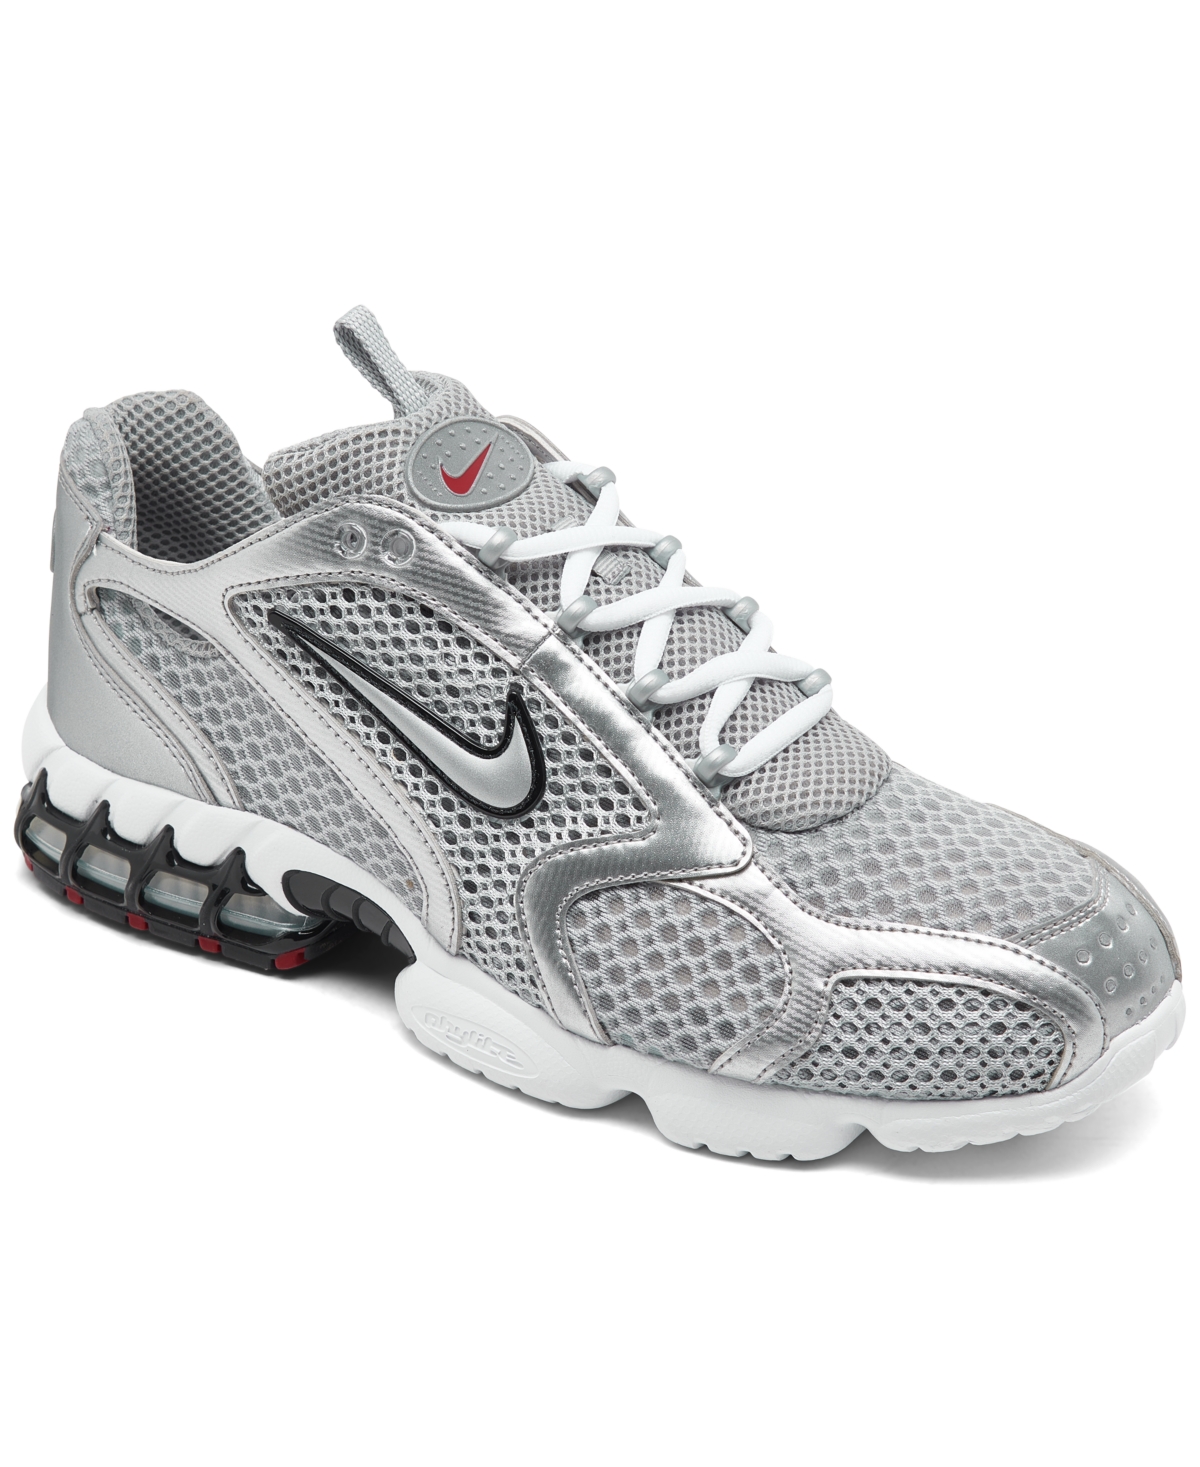 Men's Zoom Spiridon Cage 2 Casual Sneakers from Finish Line - Grey/Silver